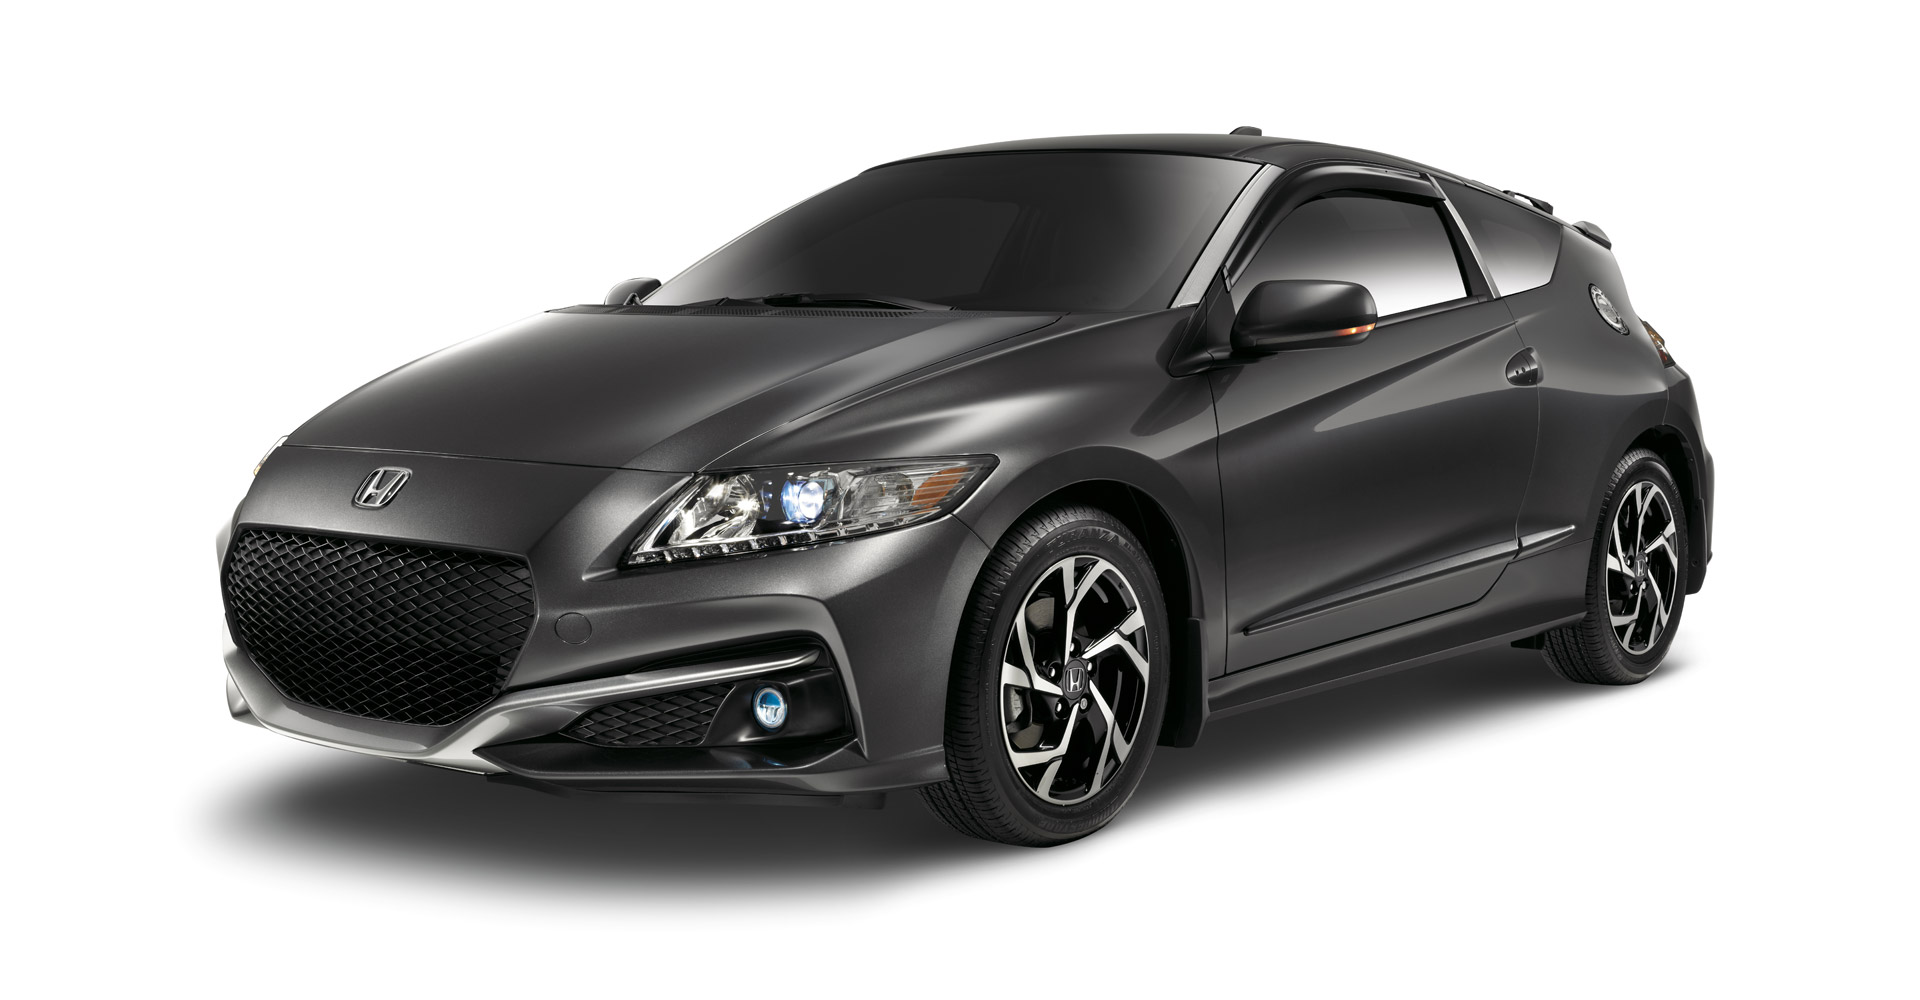 Does the 2016 Honda CR-Z Hybrid Have the Best MPG?